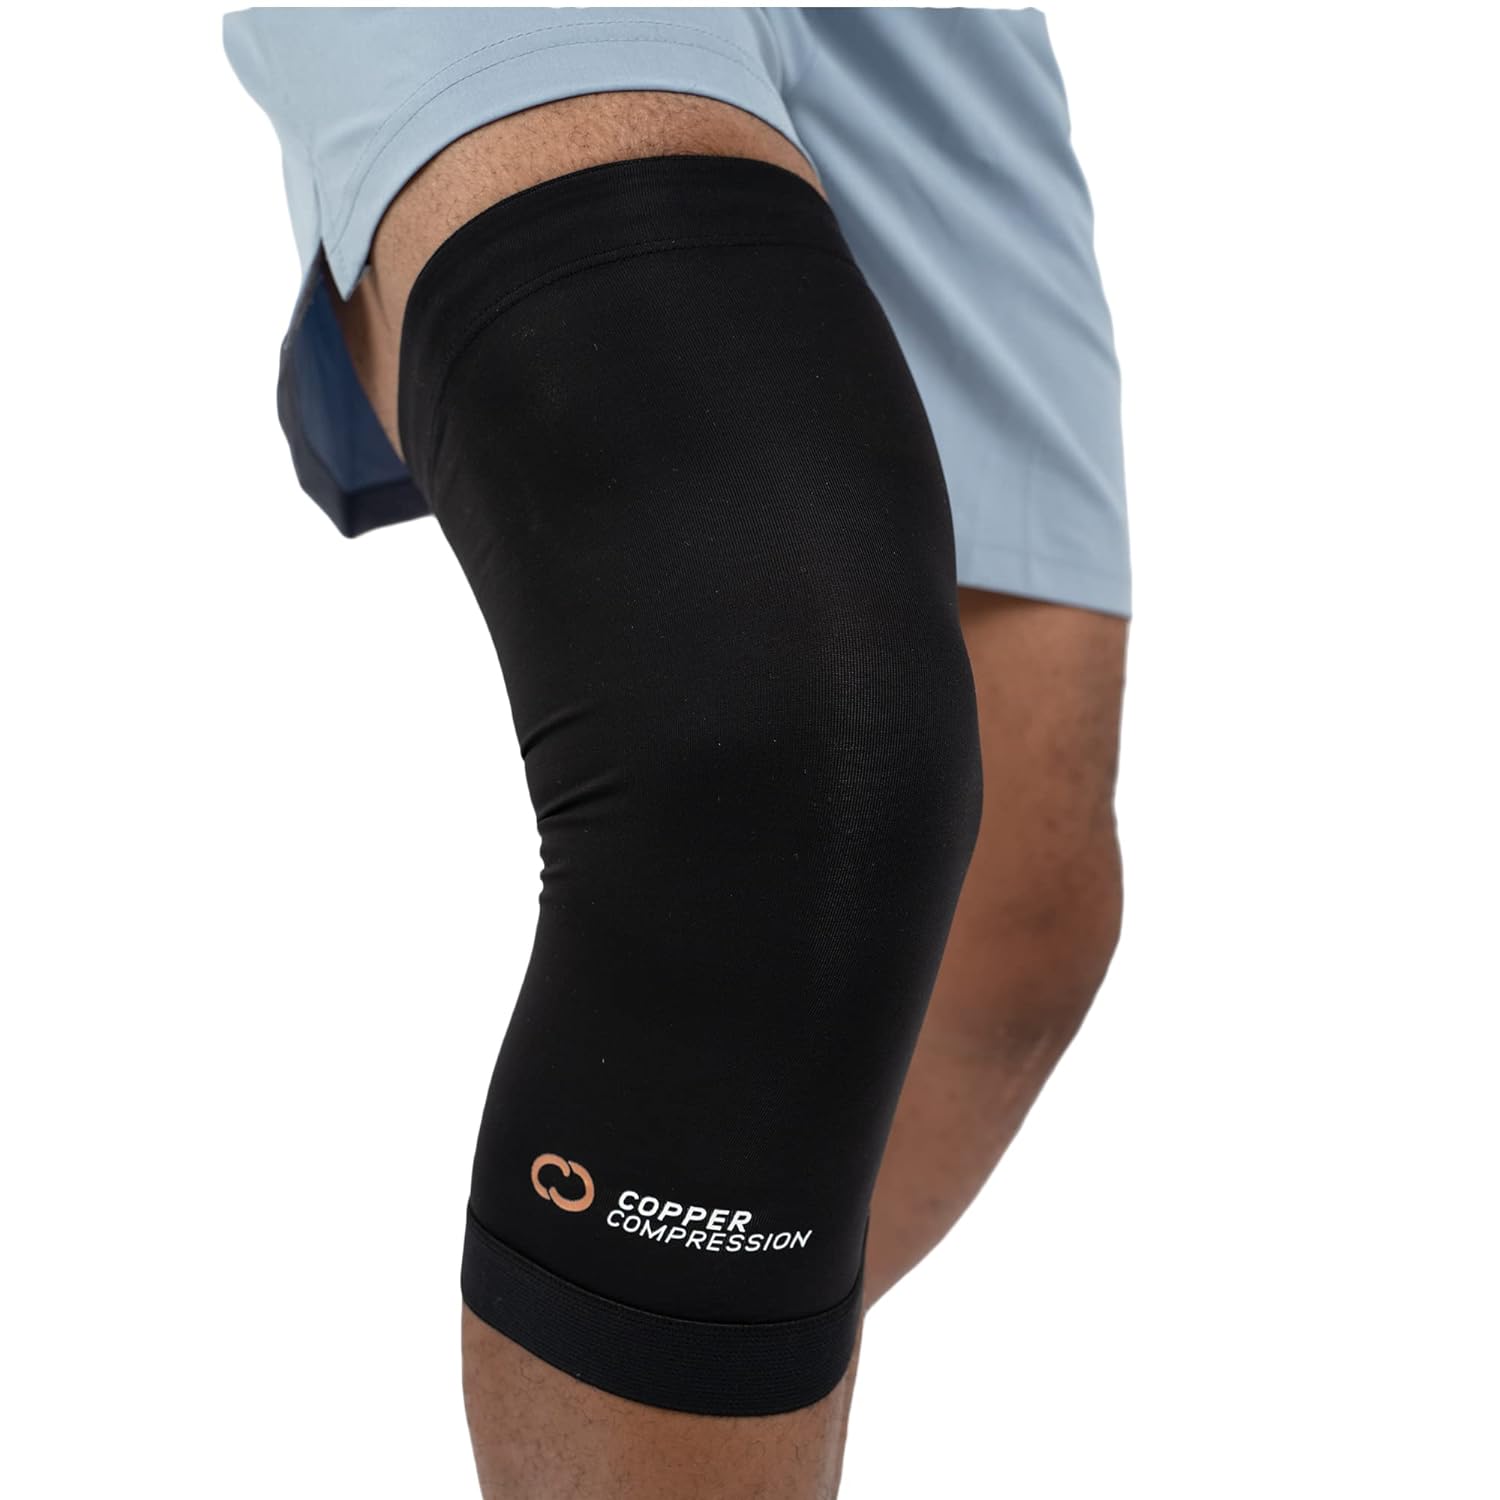 Featured Image for Copper Compression Knee Brace for Knee Pain – Copper Infused Knee Stabilizer Orthopedic Brace – Meniscus Tear, ACL, MCL, Arthritis, Joint Pain Relief, Running, Sports, Hiking. Fit for Men & Women.